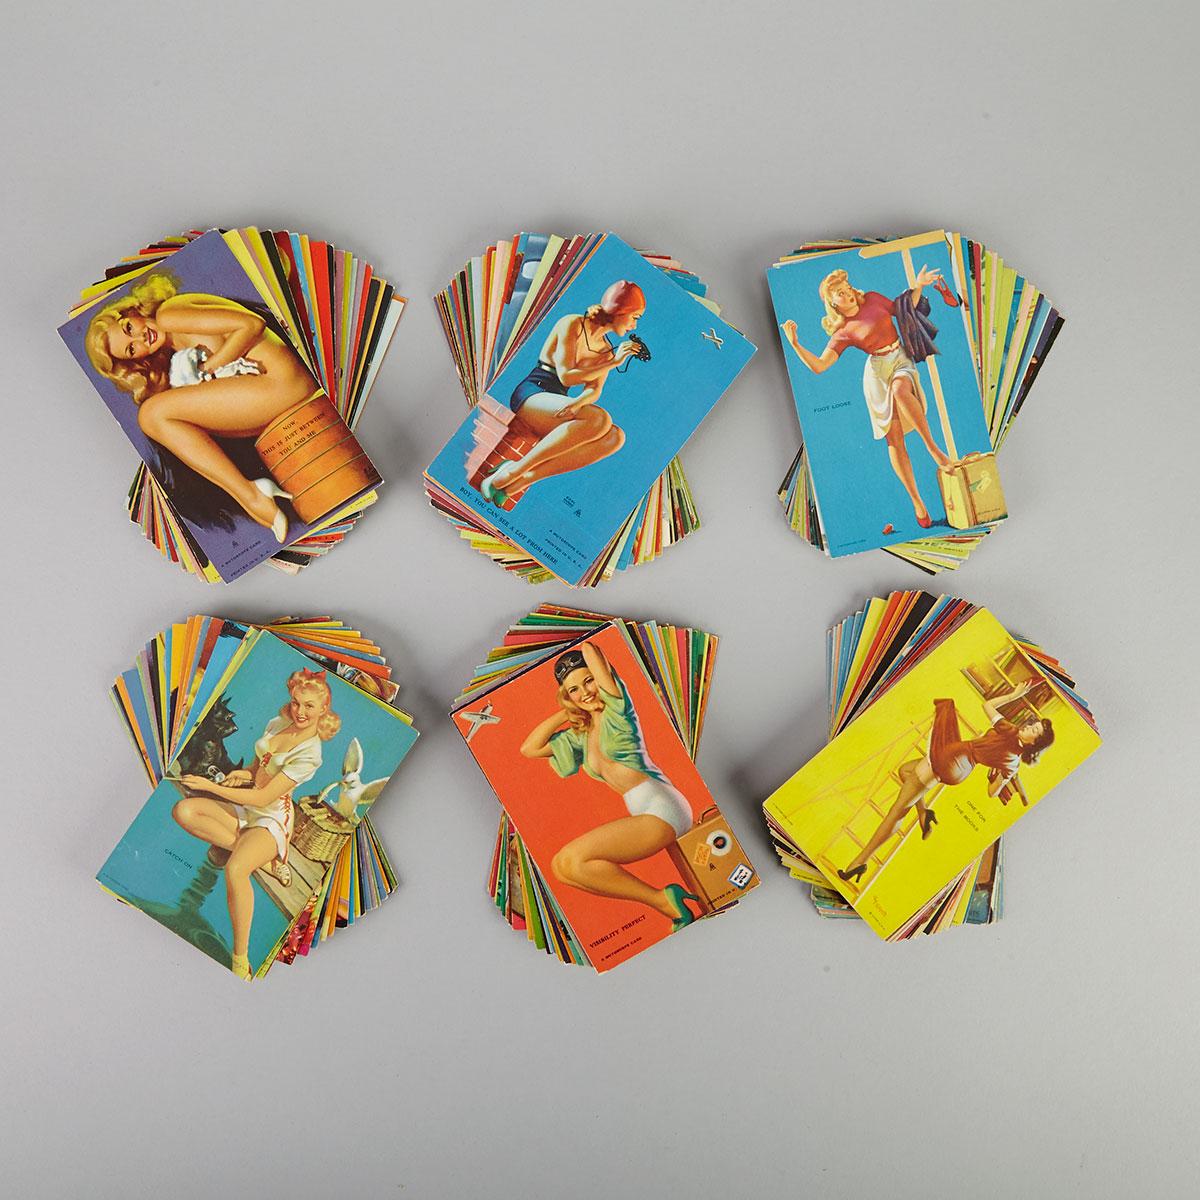 Quantity of Pin Up Mutoscope Cards, mid 20th century